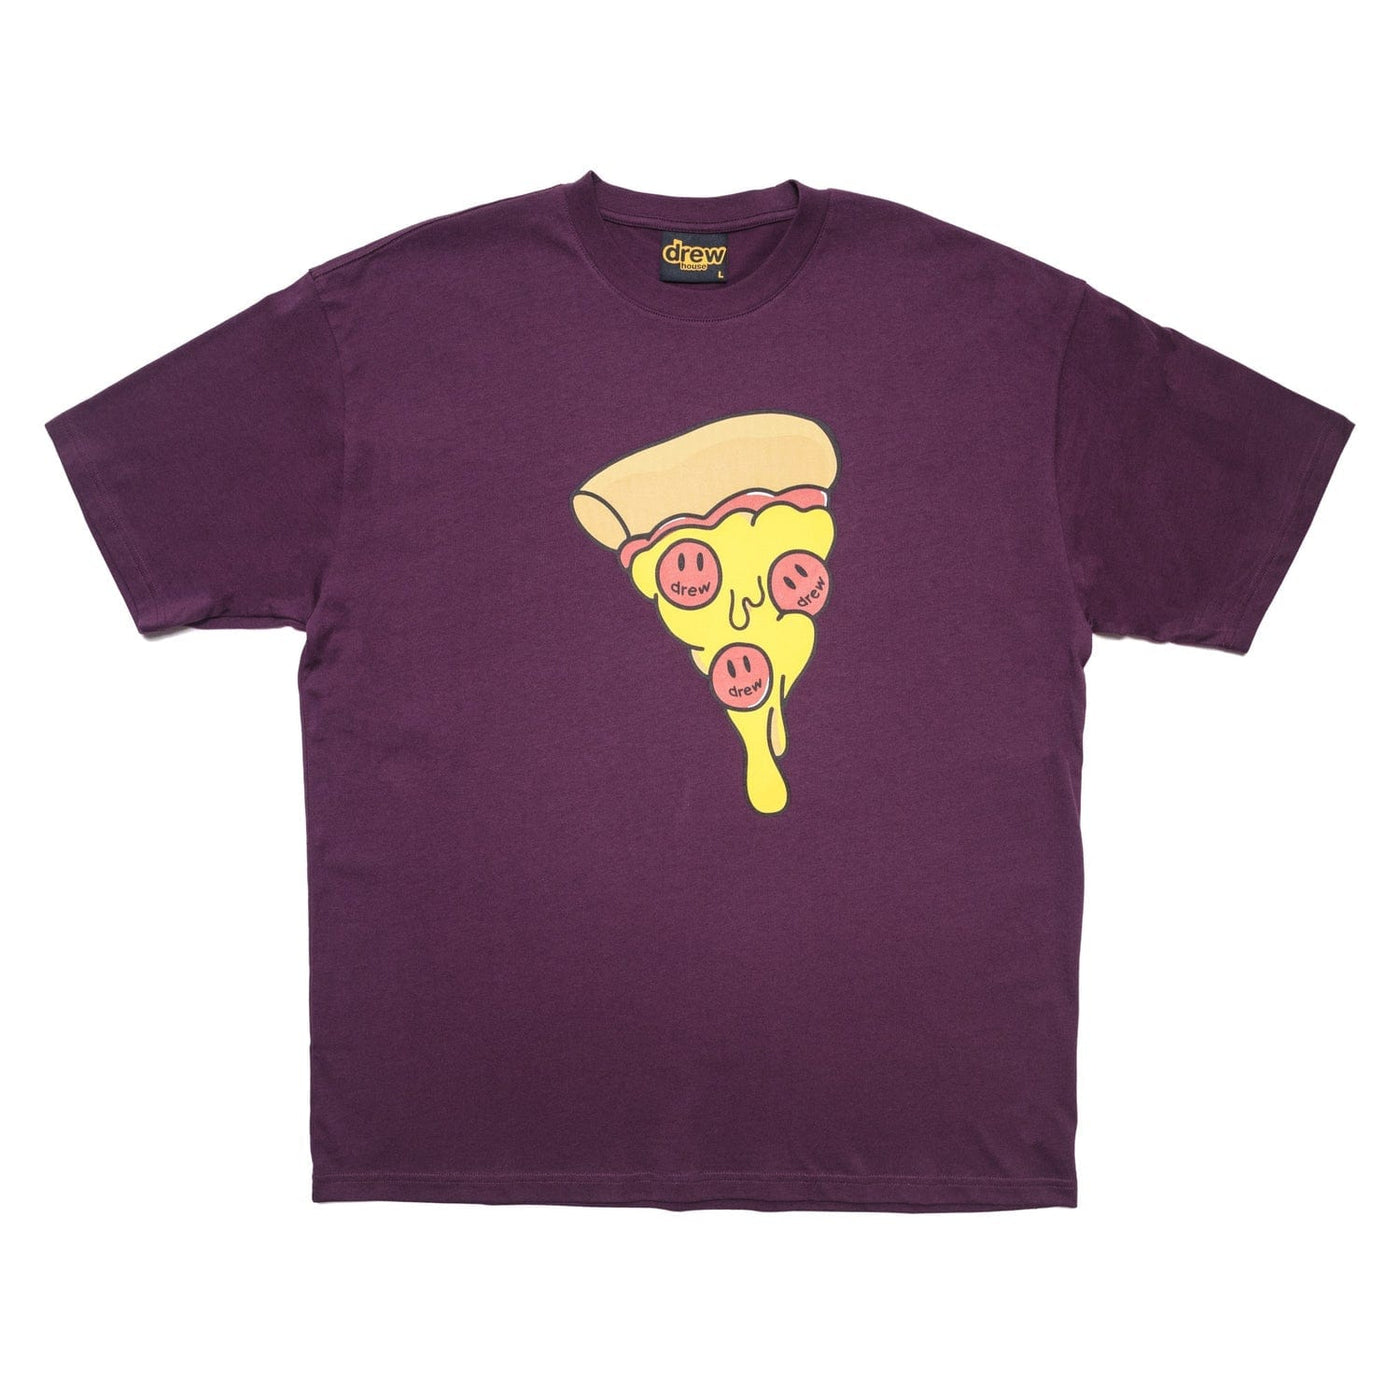 DREW HOUSE CLOTHING DREW HOUSE PIZZA T-SHIRT BERRY